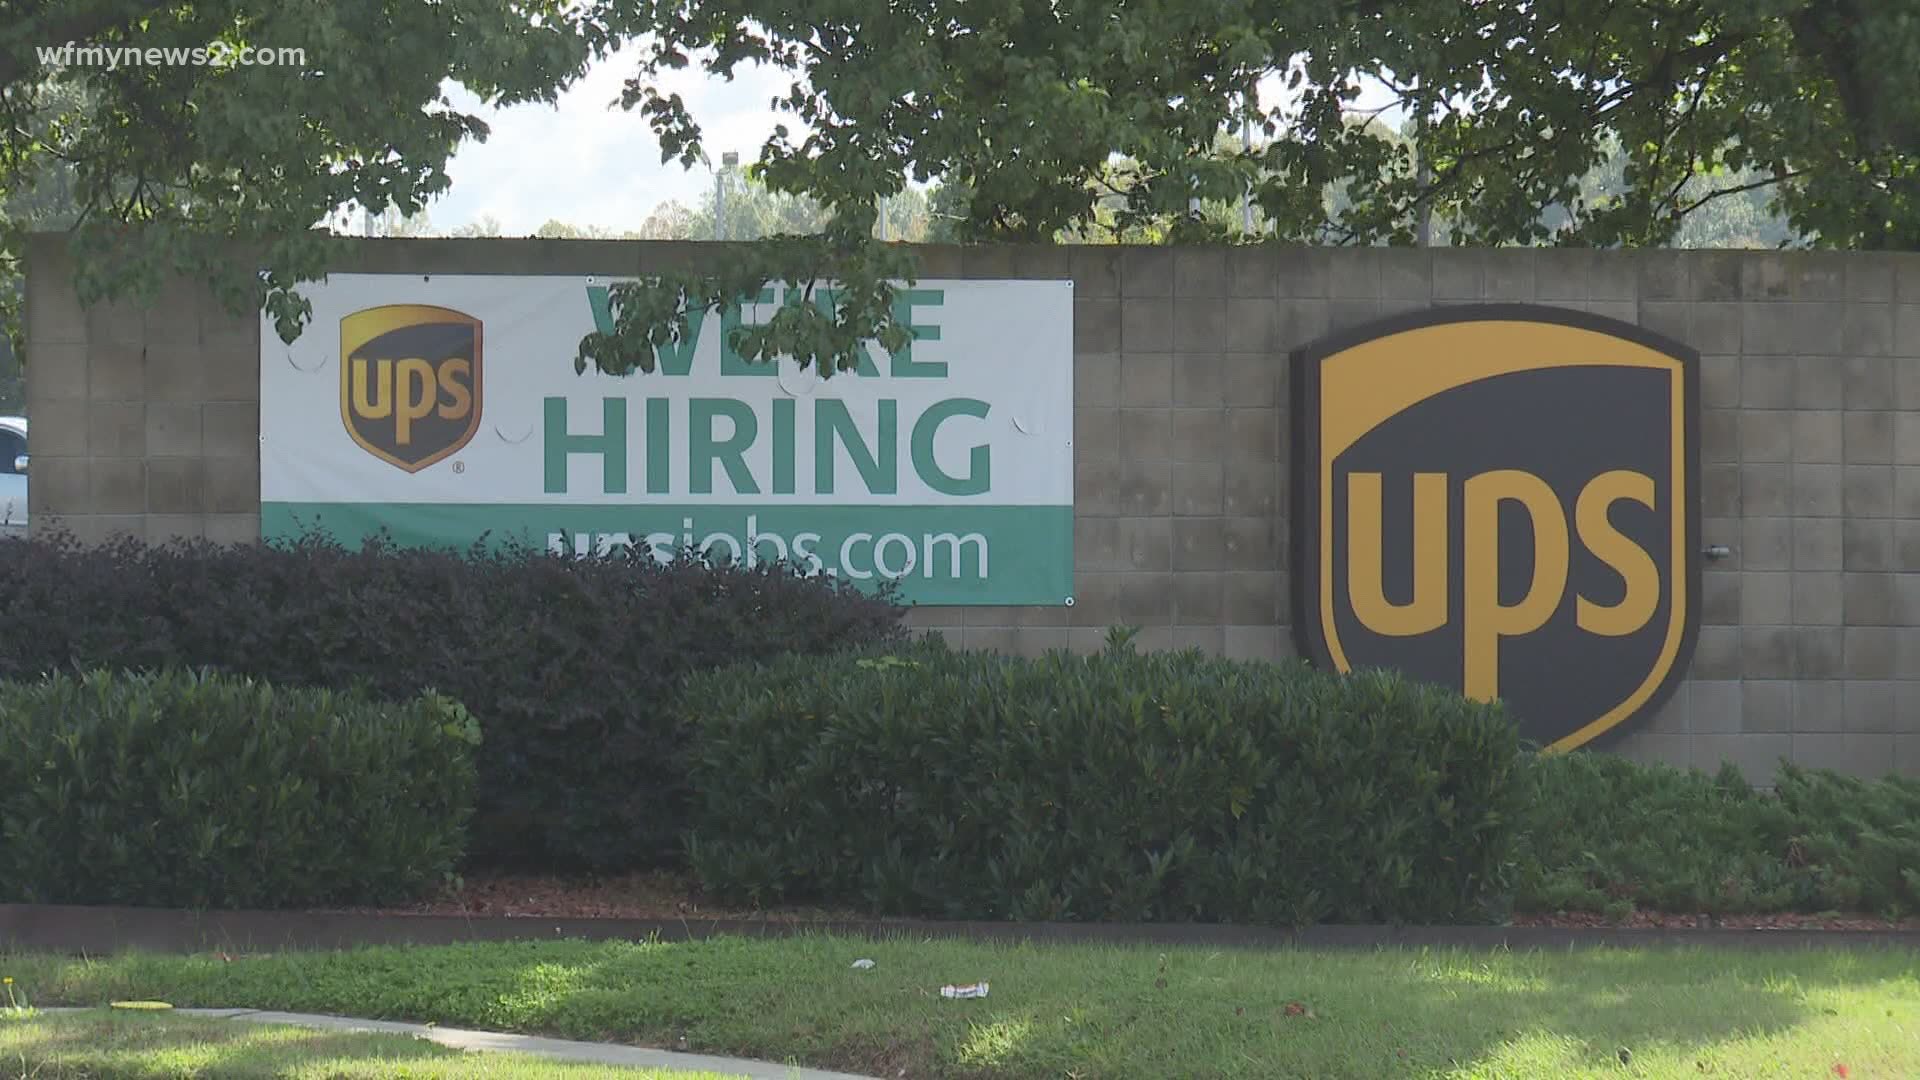 UPS is investing $316 million into two job sites in the Triad.